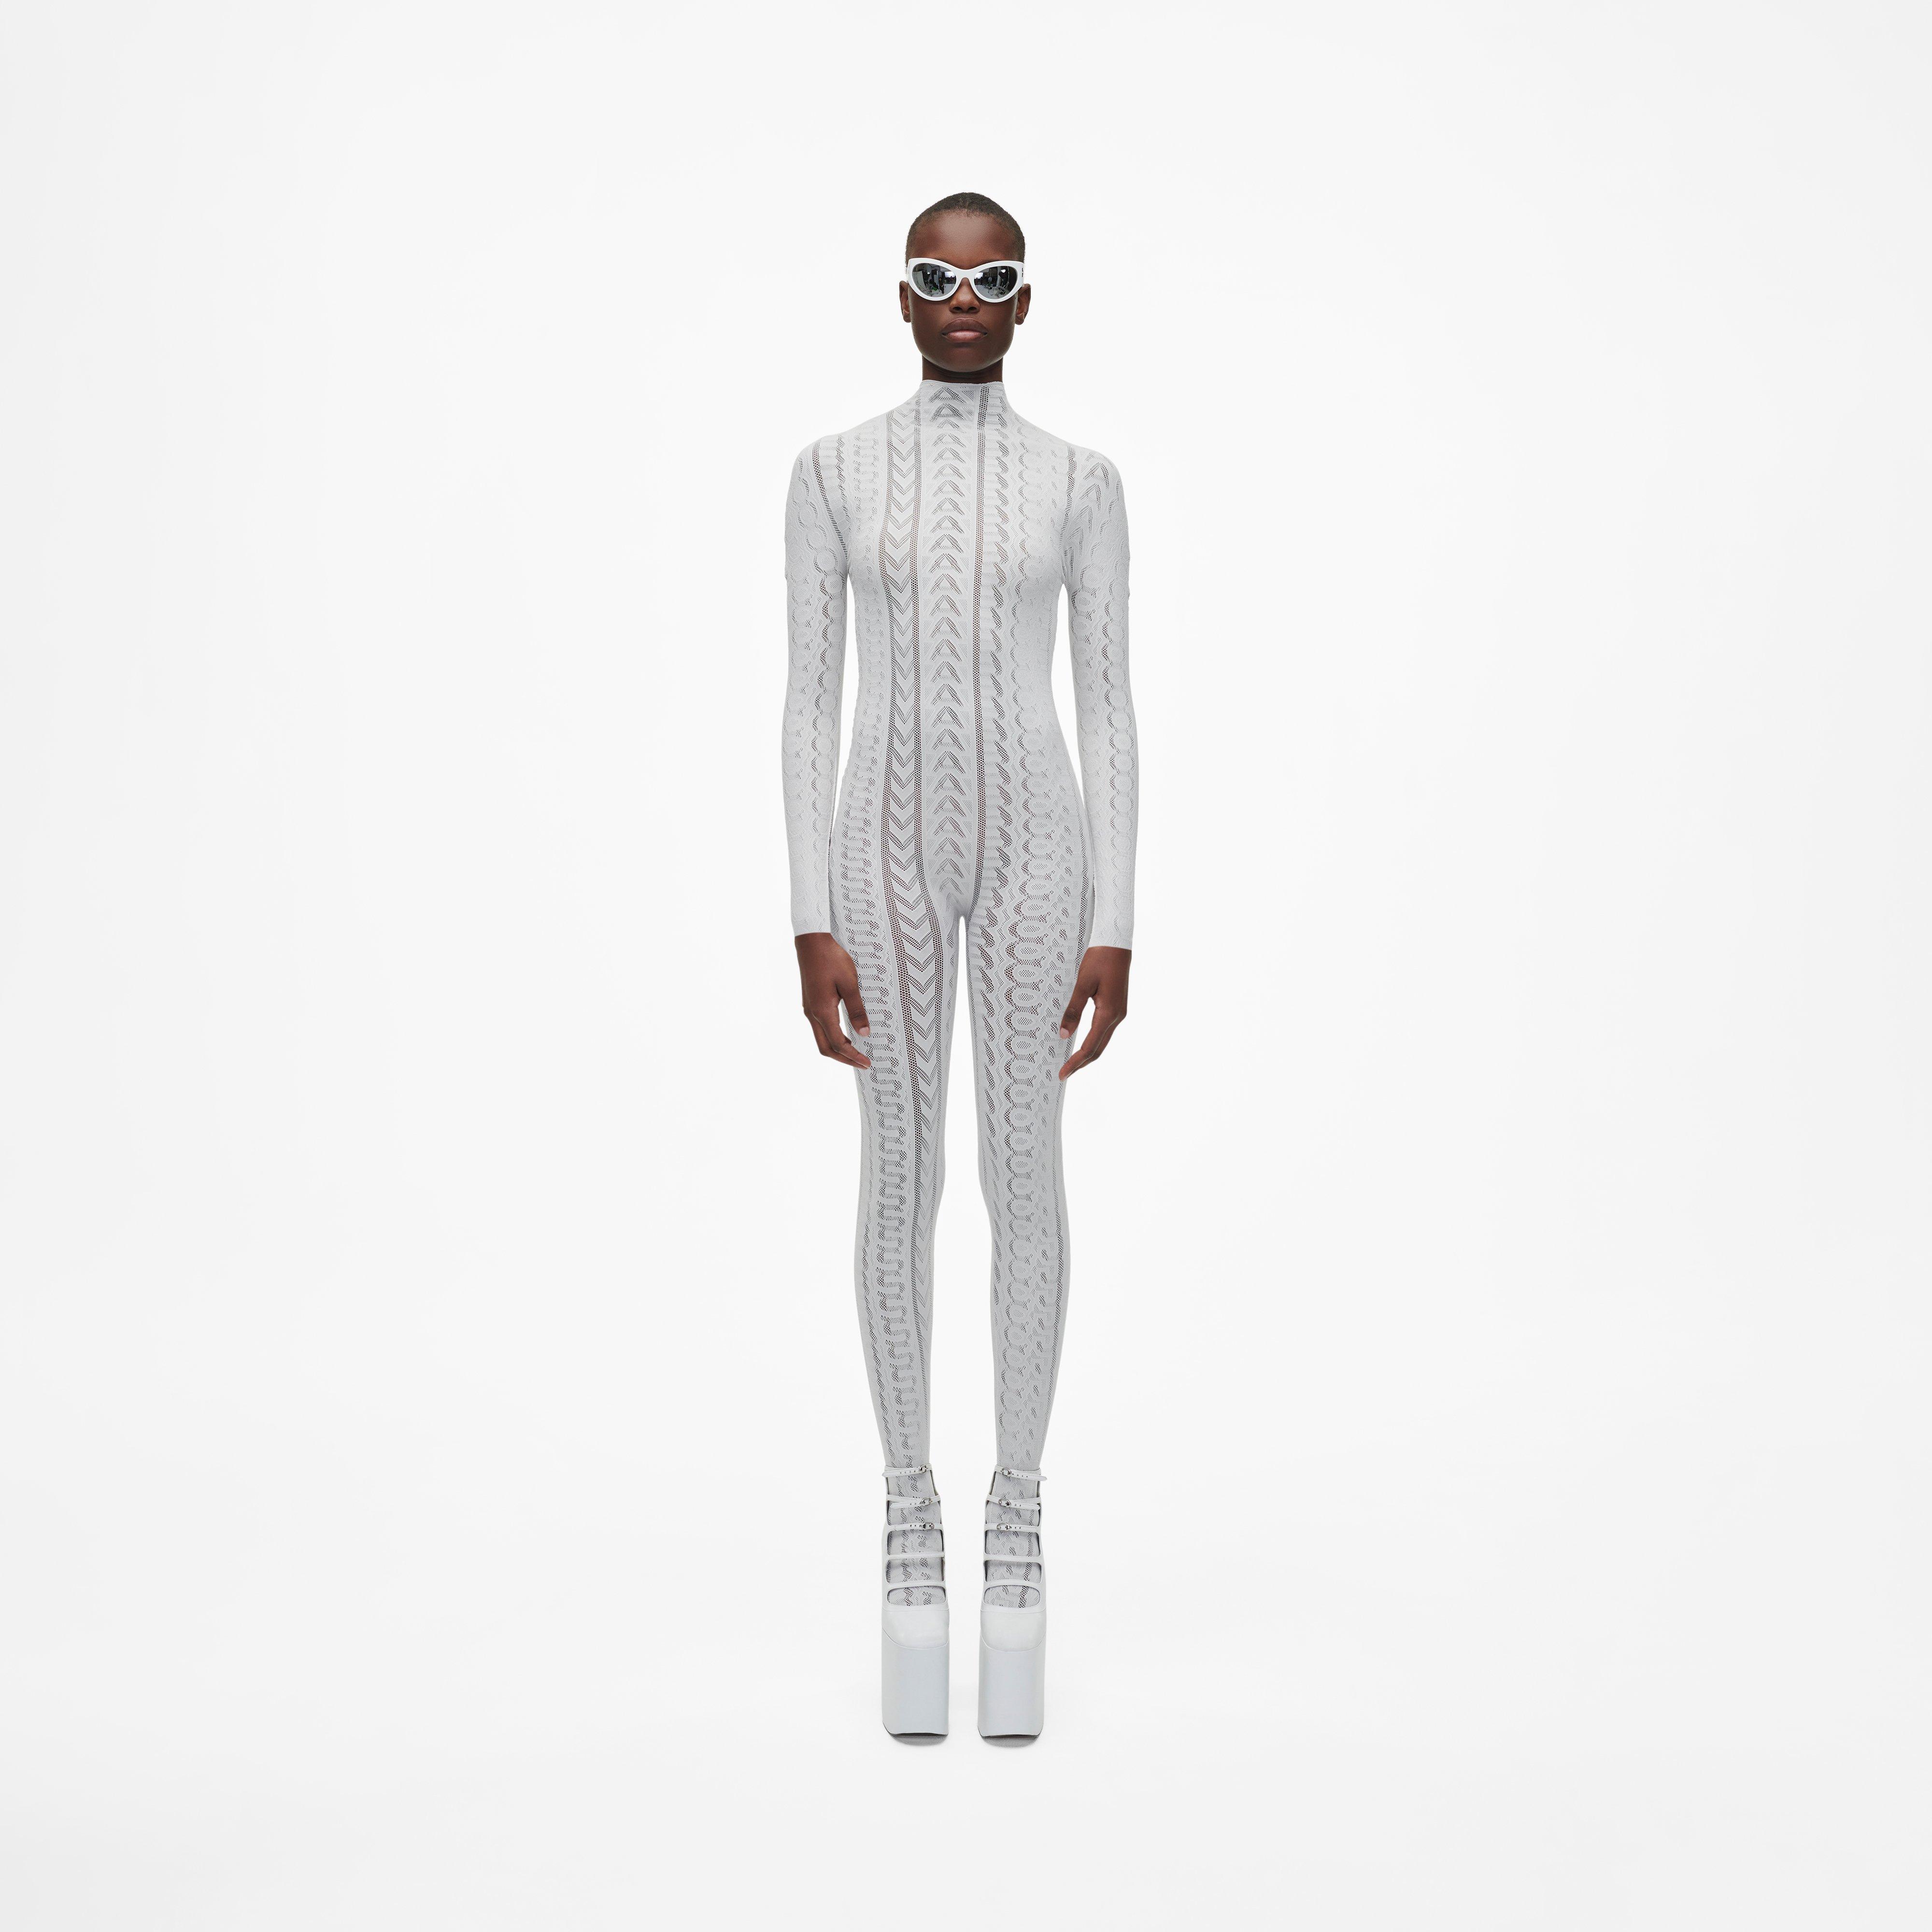 Marc by Marc jacobs Seamless Catsuit,WHITE